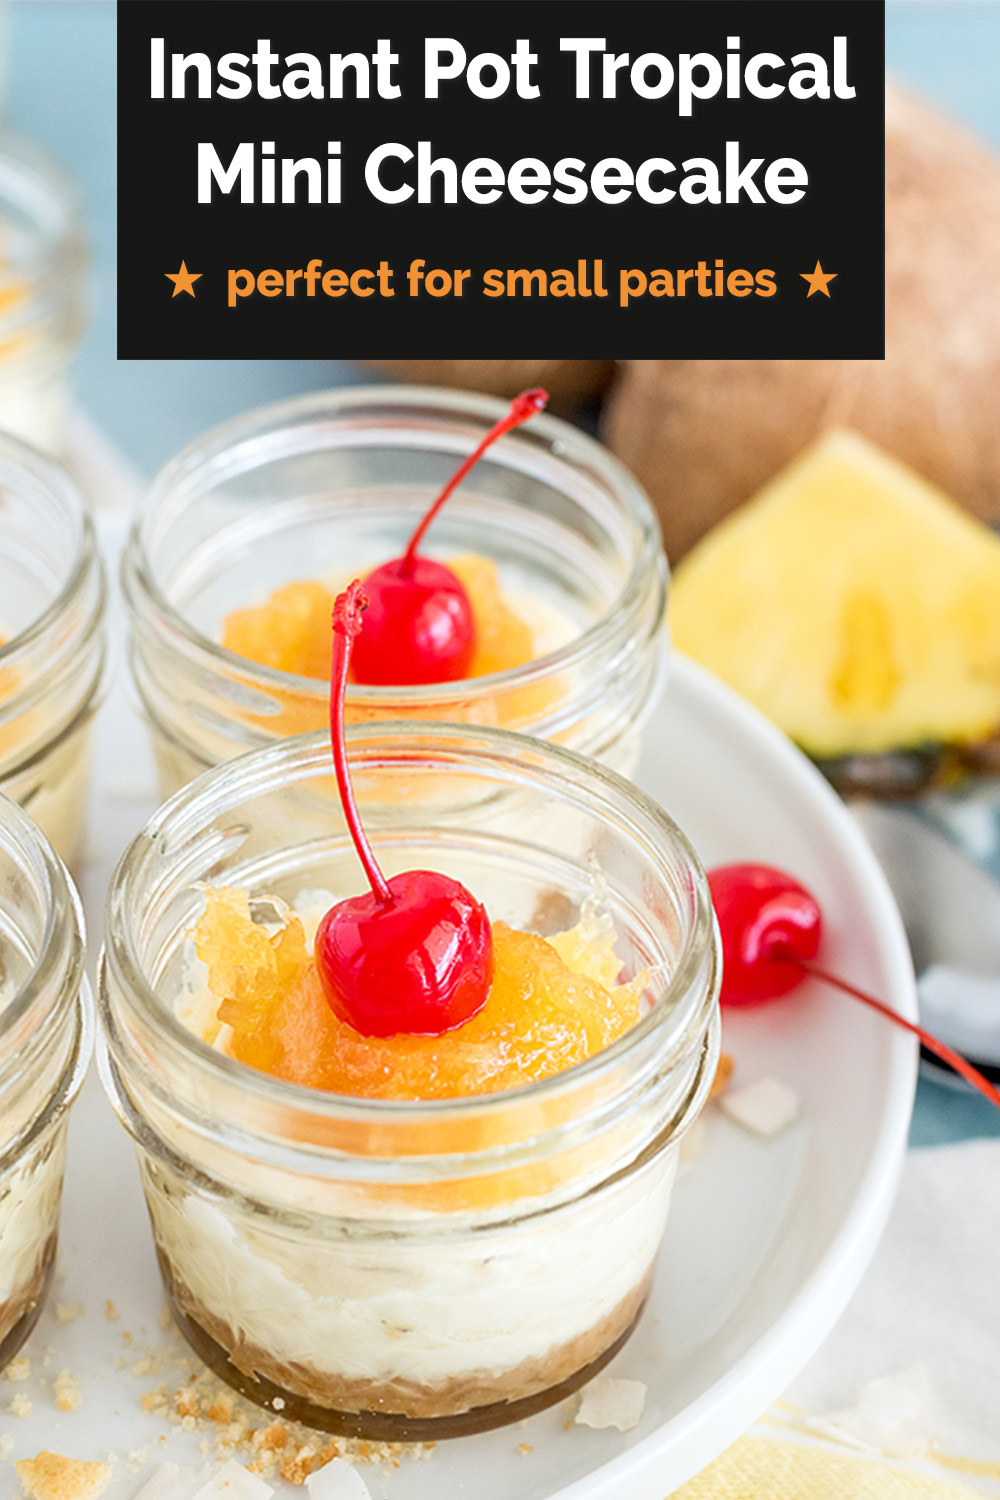 A Pinterest image that reads "Instant Pot Tropical Mini Cheesecakes: perfect for small parties" overlaid on a close-up image of two mini mason jars filled with coconut cheesecake, pineapple topping, and a maraschino cherry with a pineapple wedge and a coconut in the background via @PressureCook2da